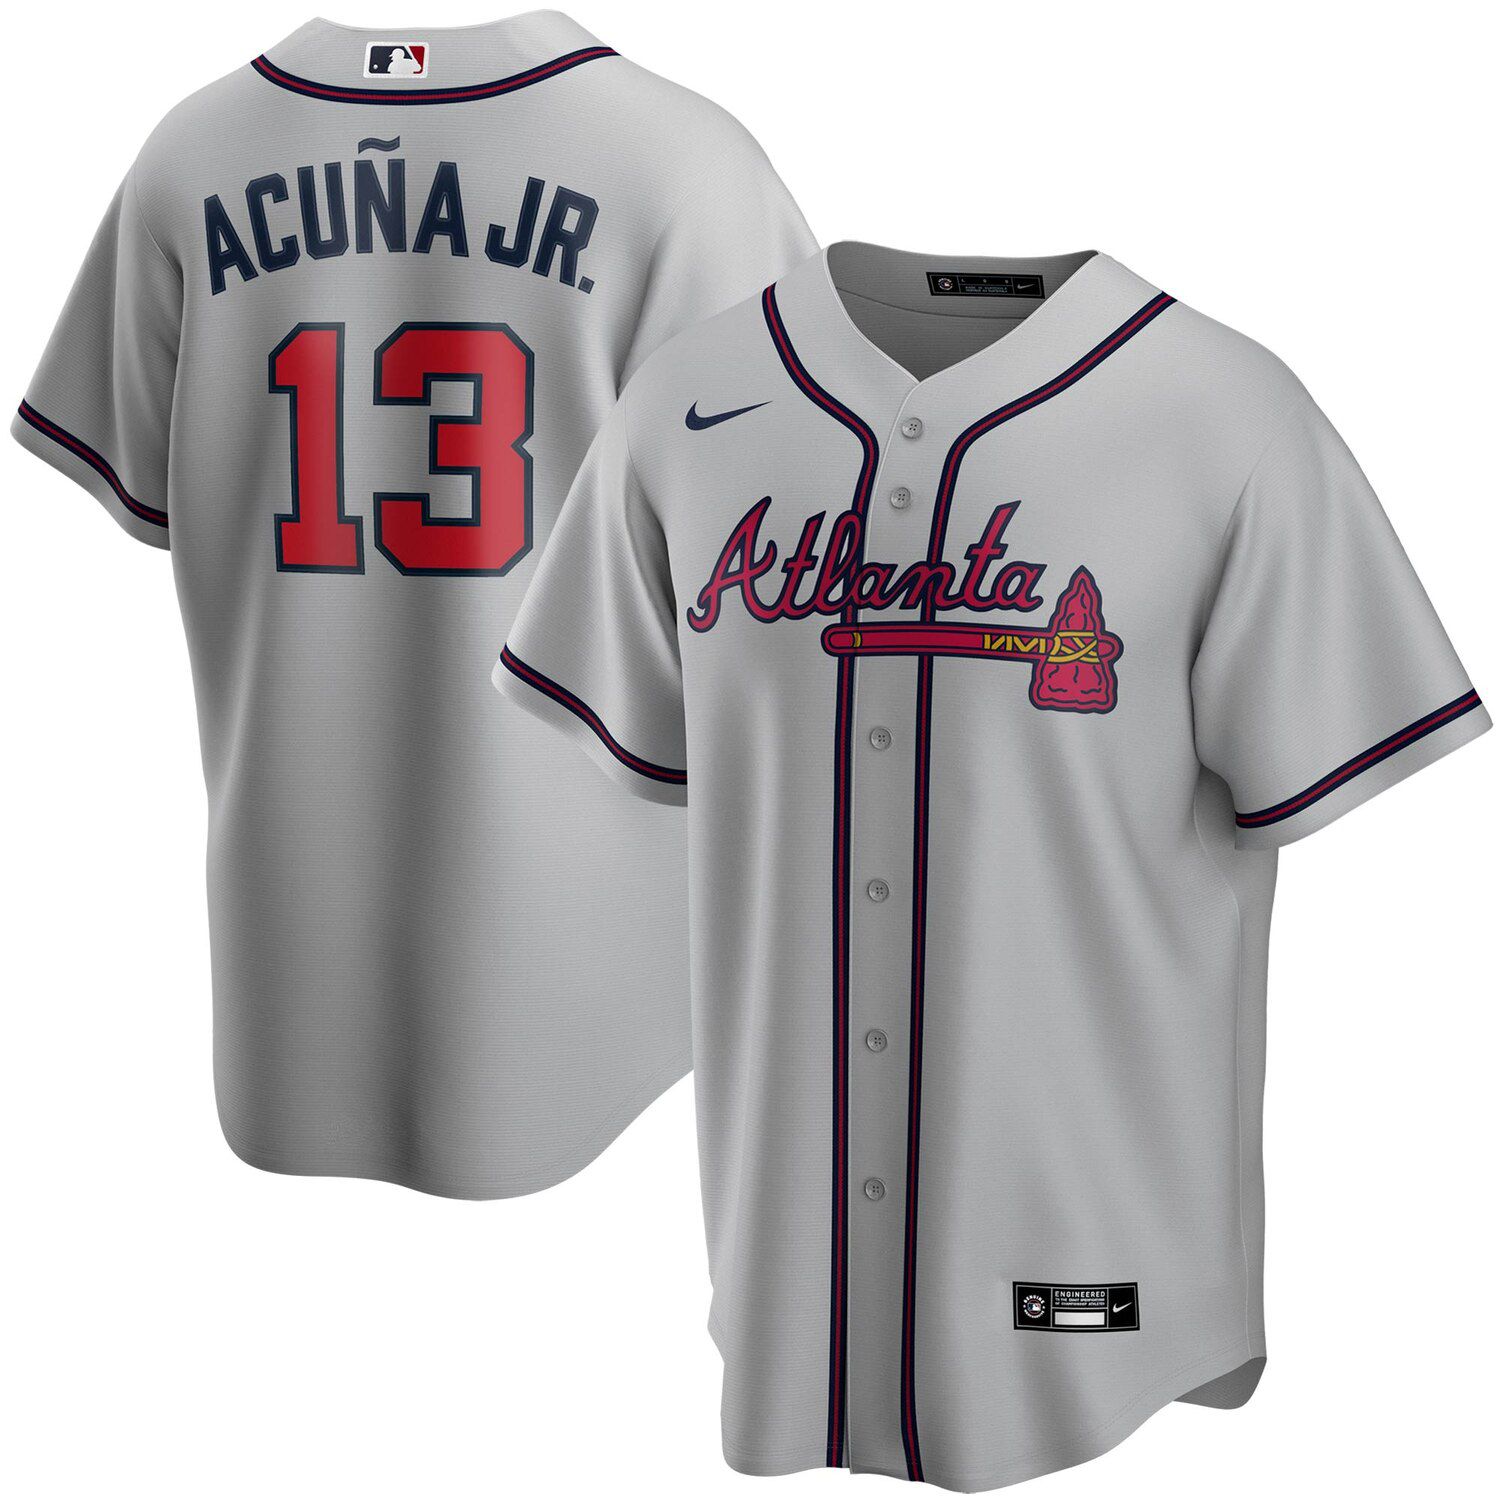 ronald acuna jersey for sale